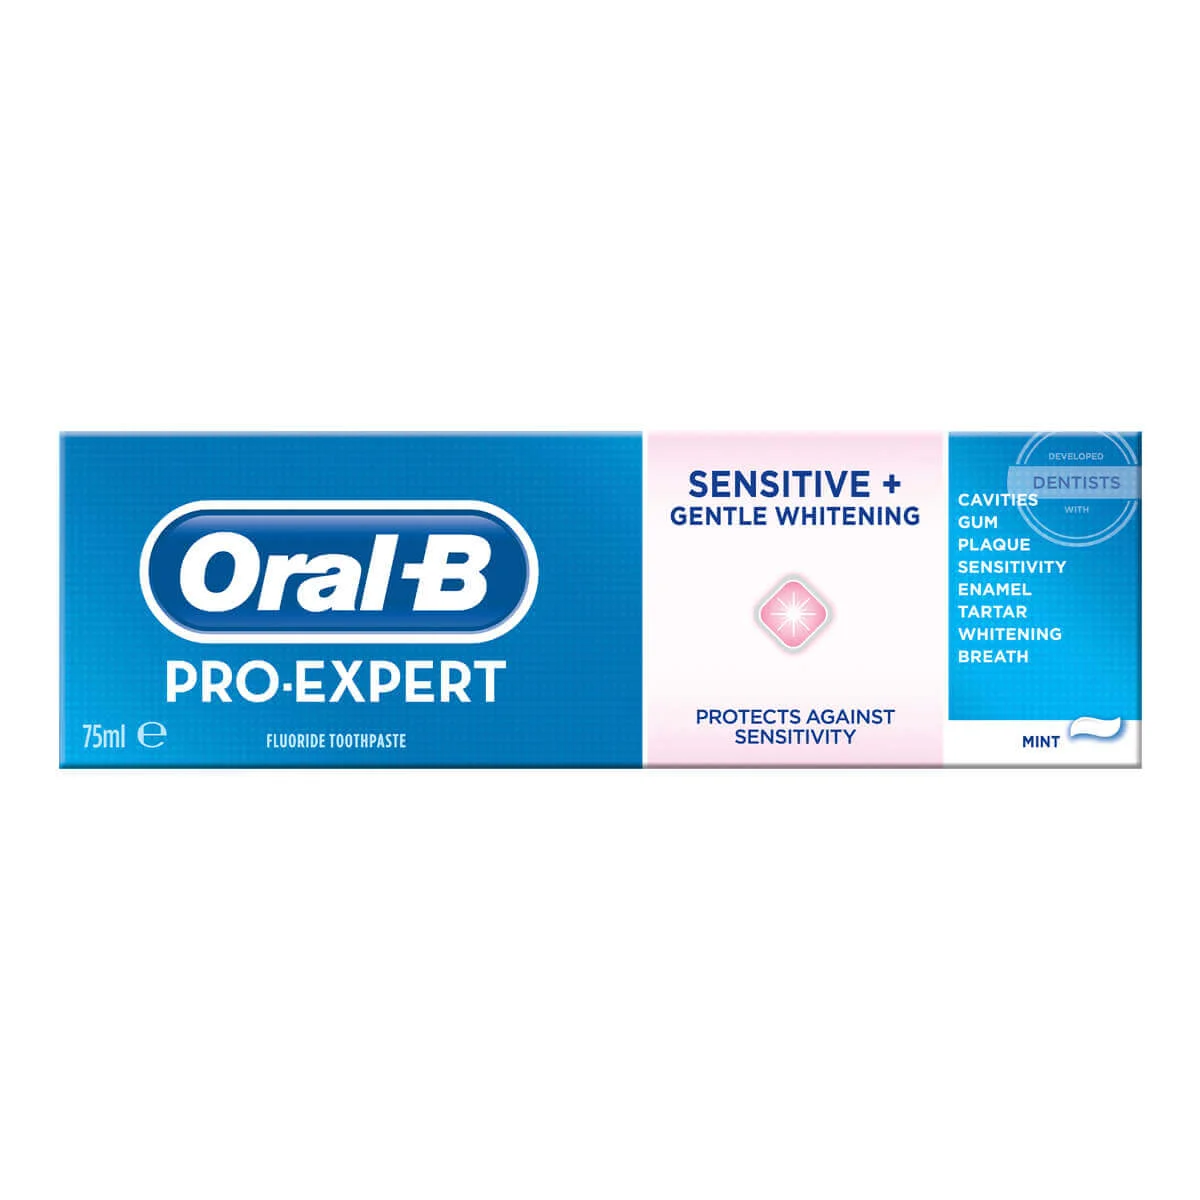 Oral-B Pro-Expert Sensitive + Gentle Whitening Toothpaste undefined